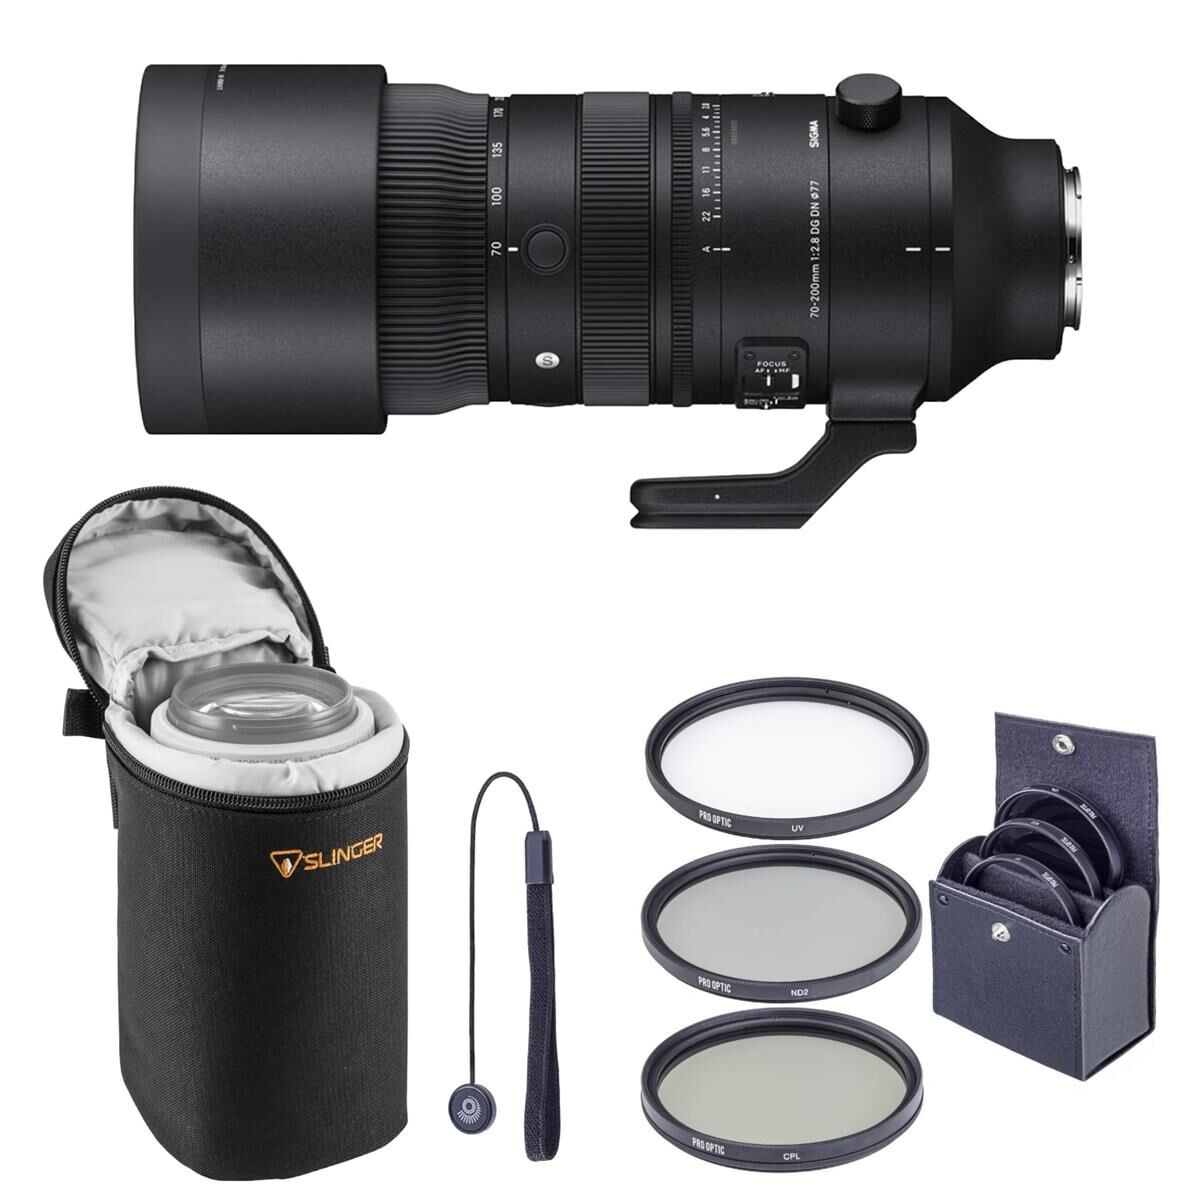 Sigma 70-200m f/2.8 DG DN OS Sports Lens for Sony E + Case + Filter + Cap Tether